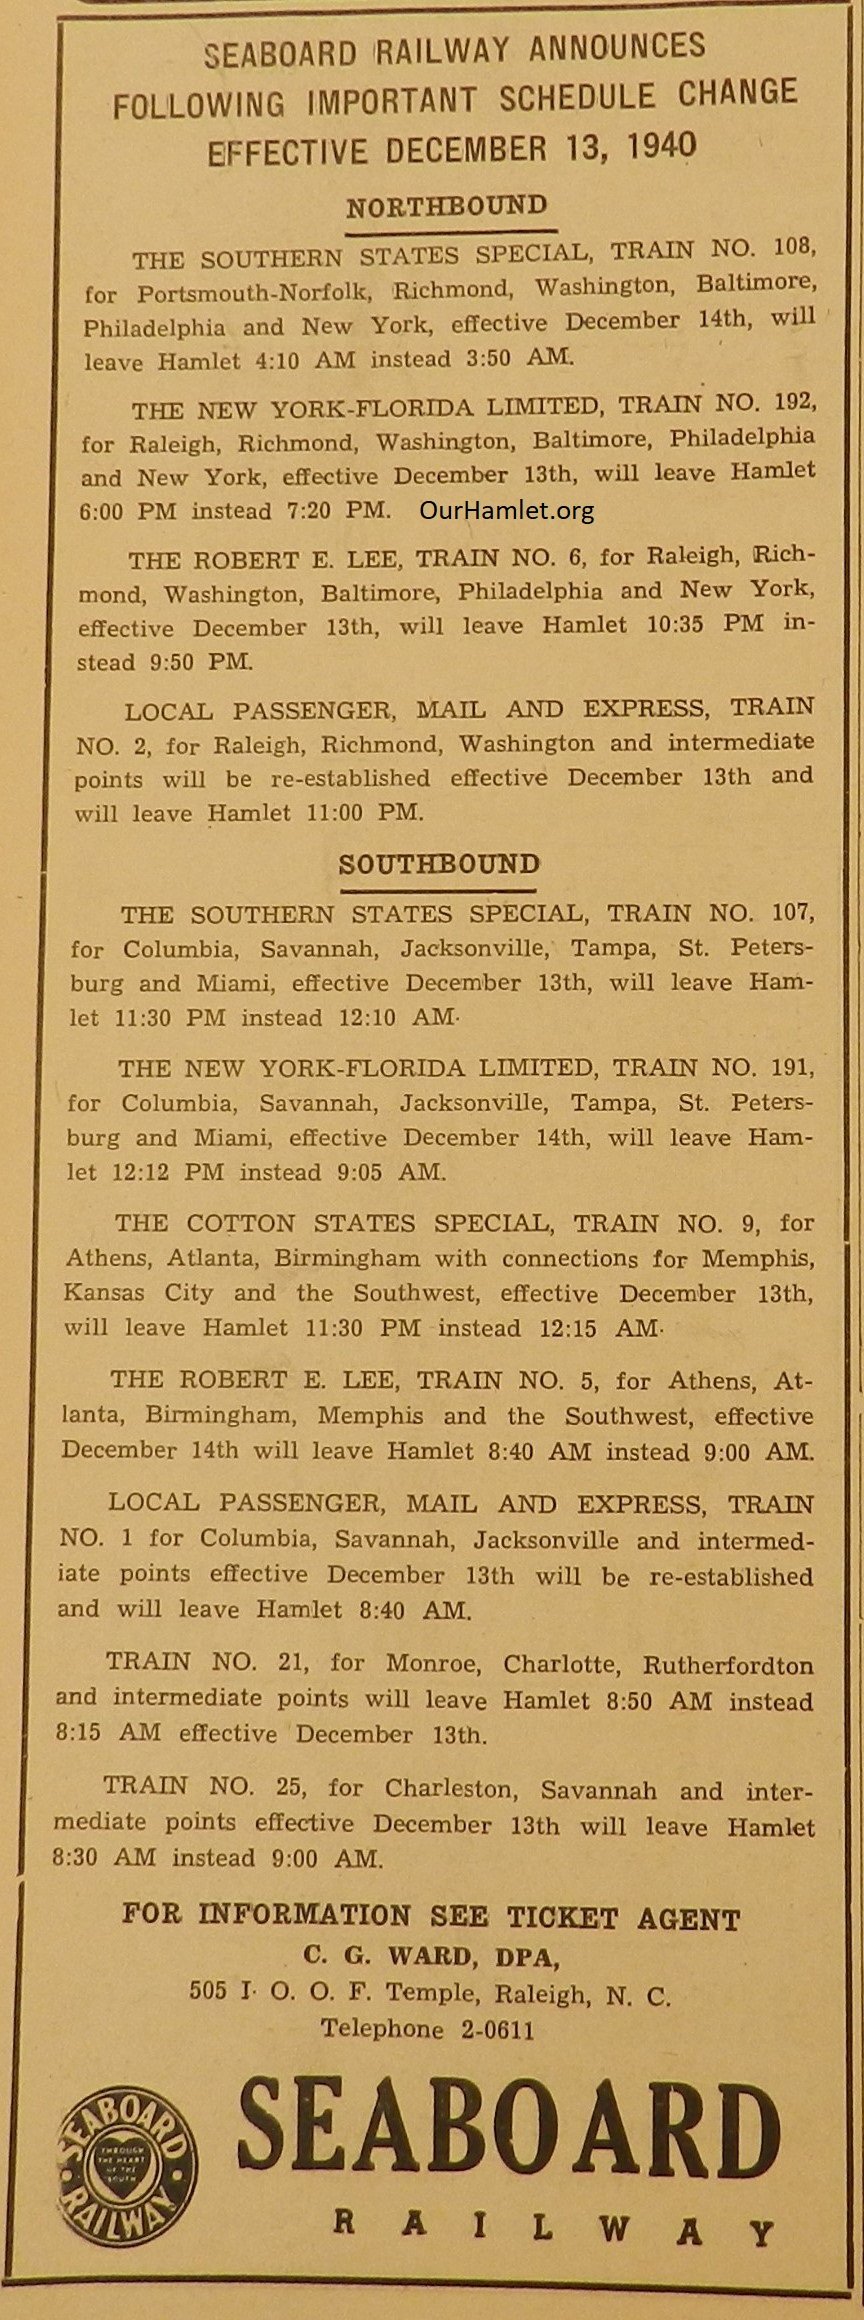 1941 Seaboard schedule changes OH.jpg